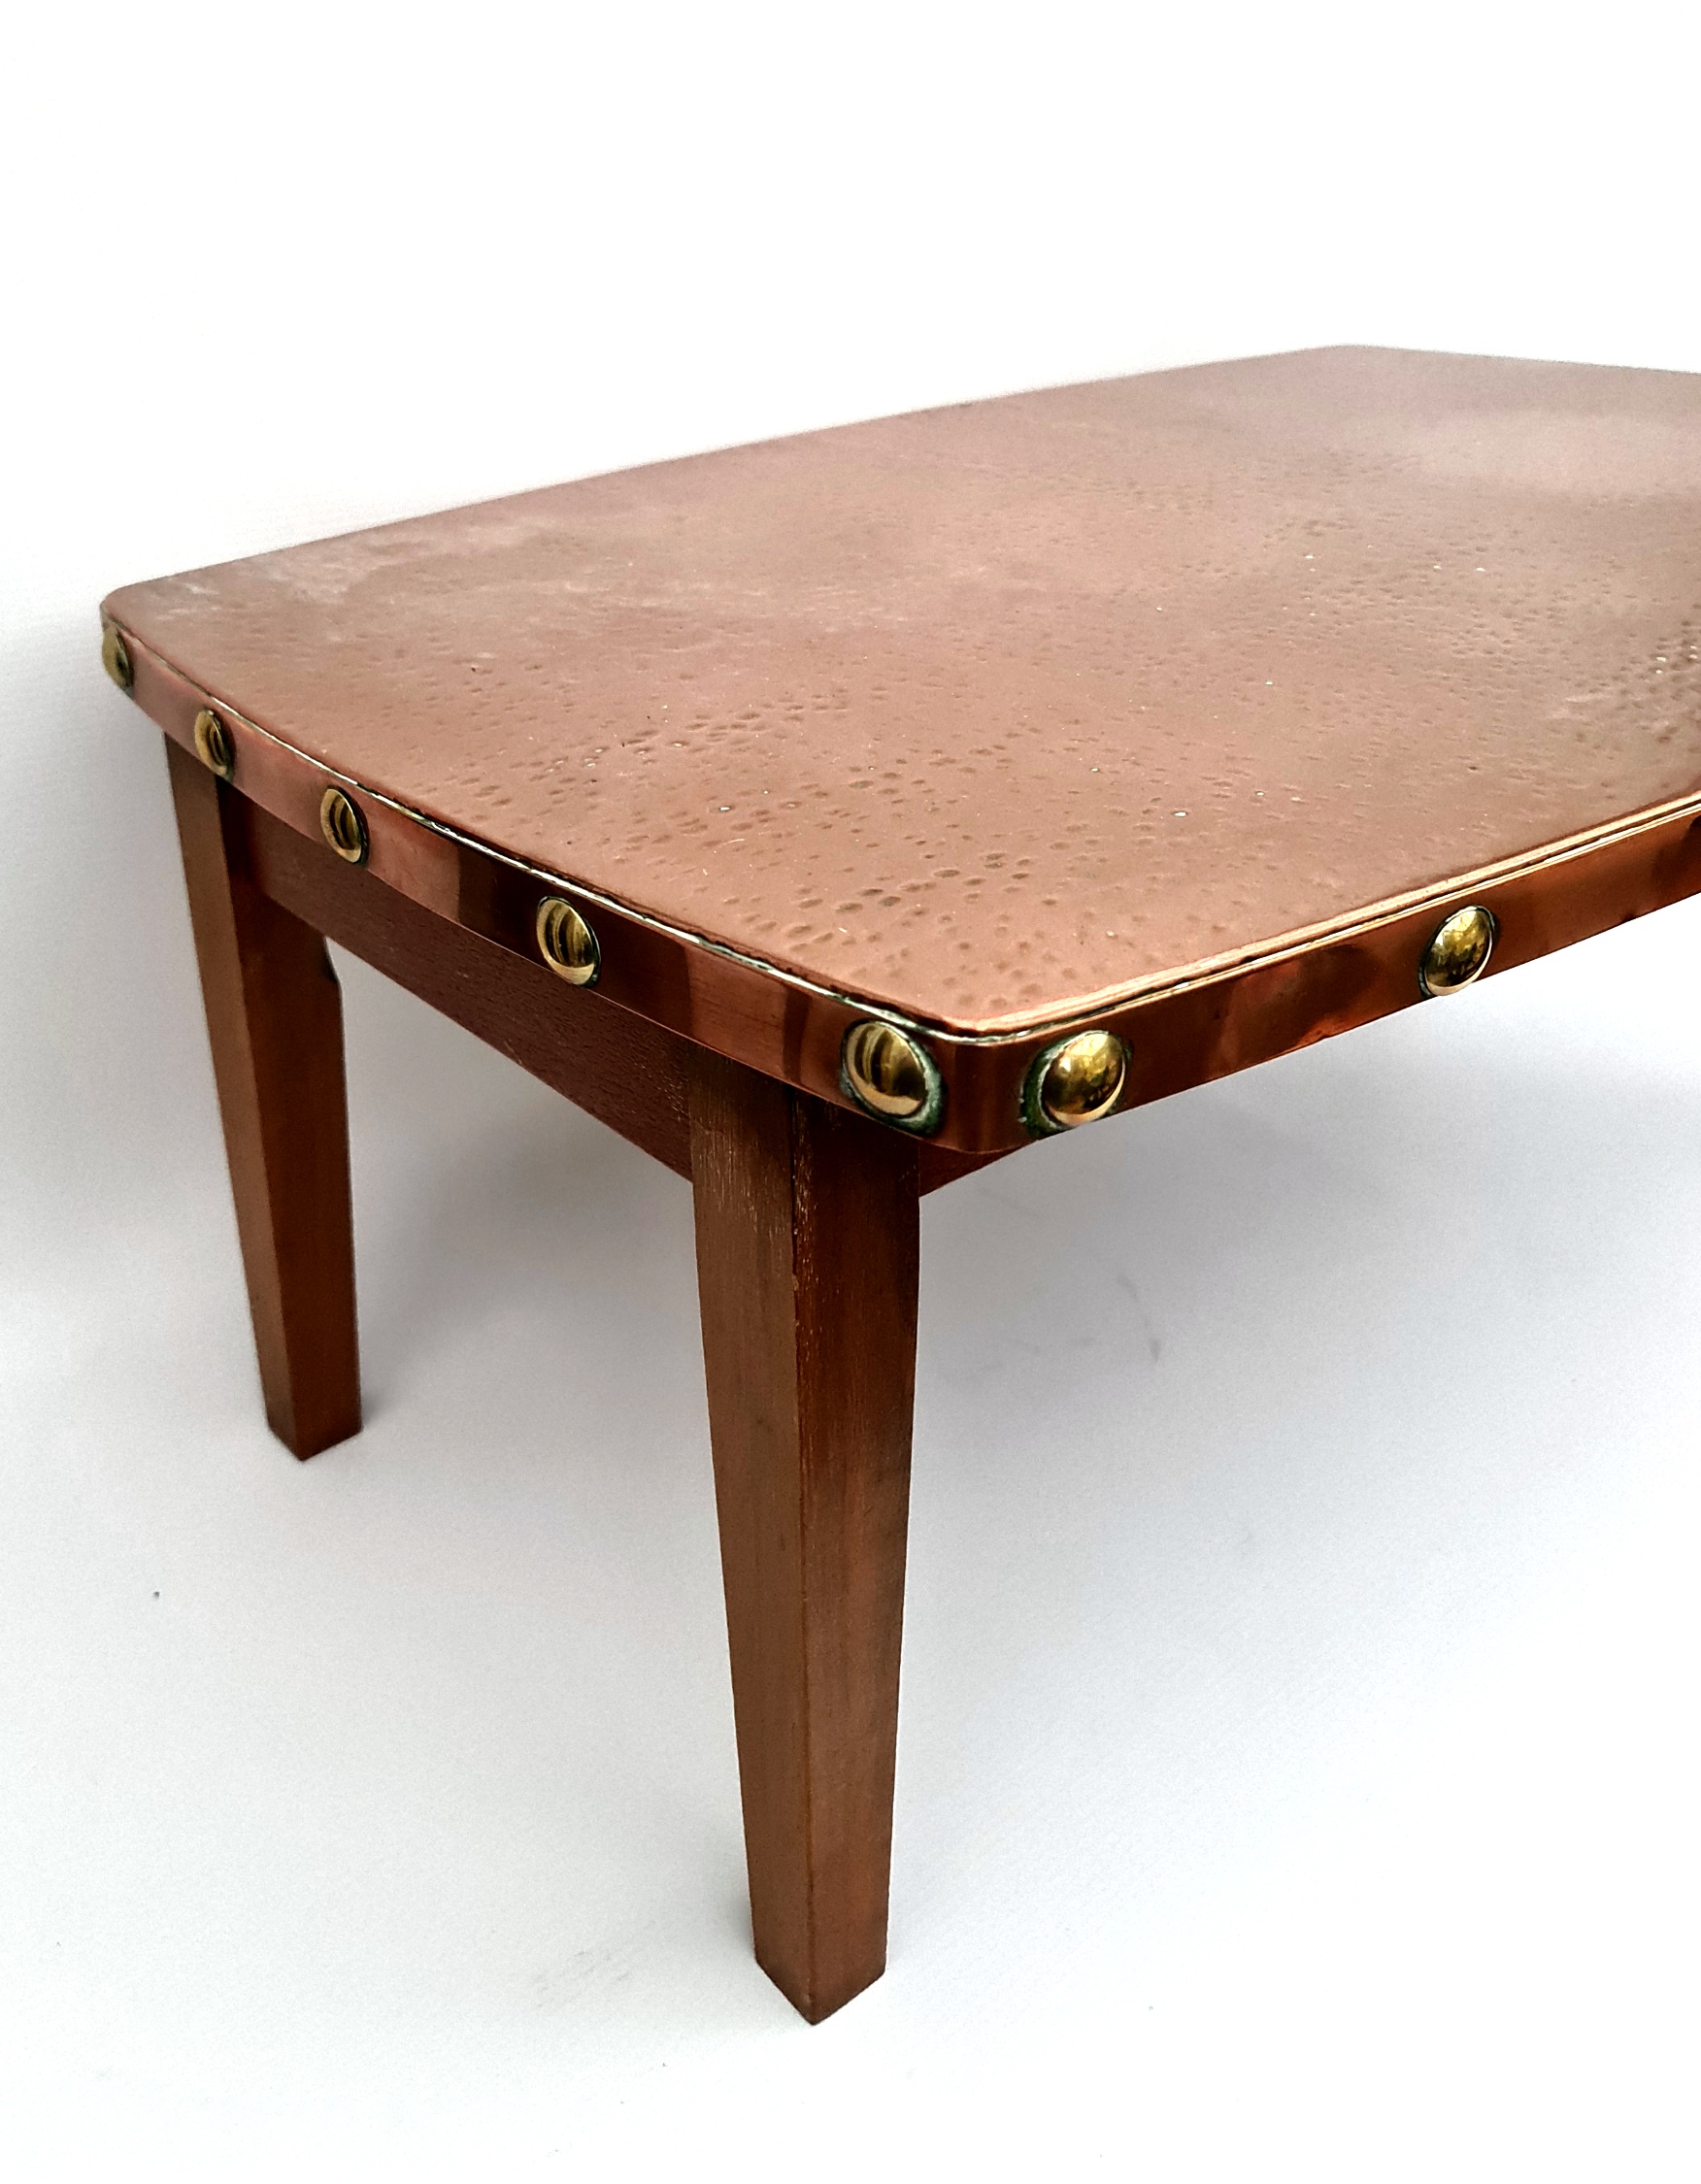 Vintage Retro Copper Topped Coffee Table with Brass Studs     Vintage Retro Copper Topped Coffee - Image 2 of 2